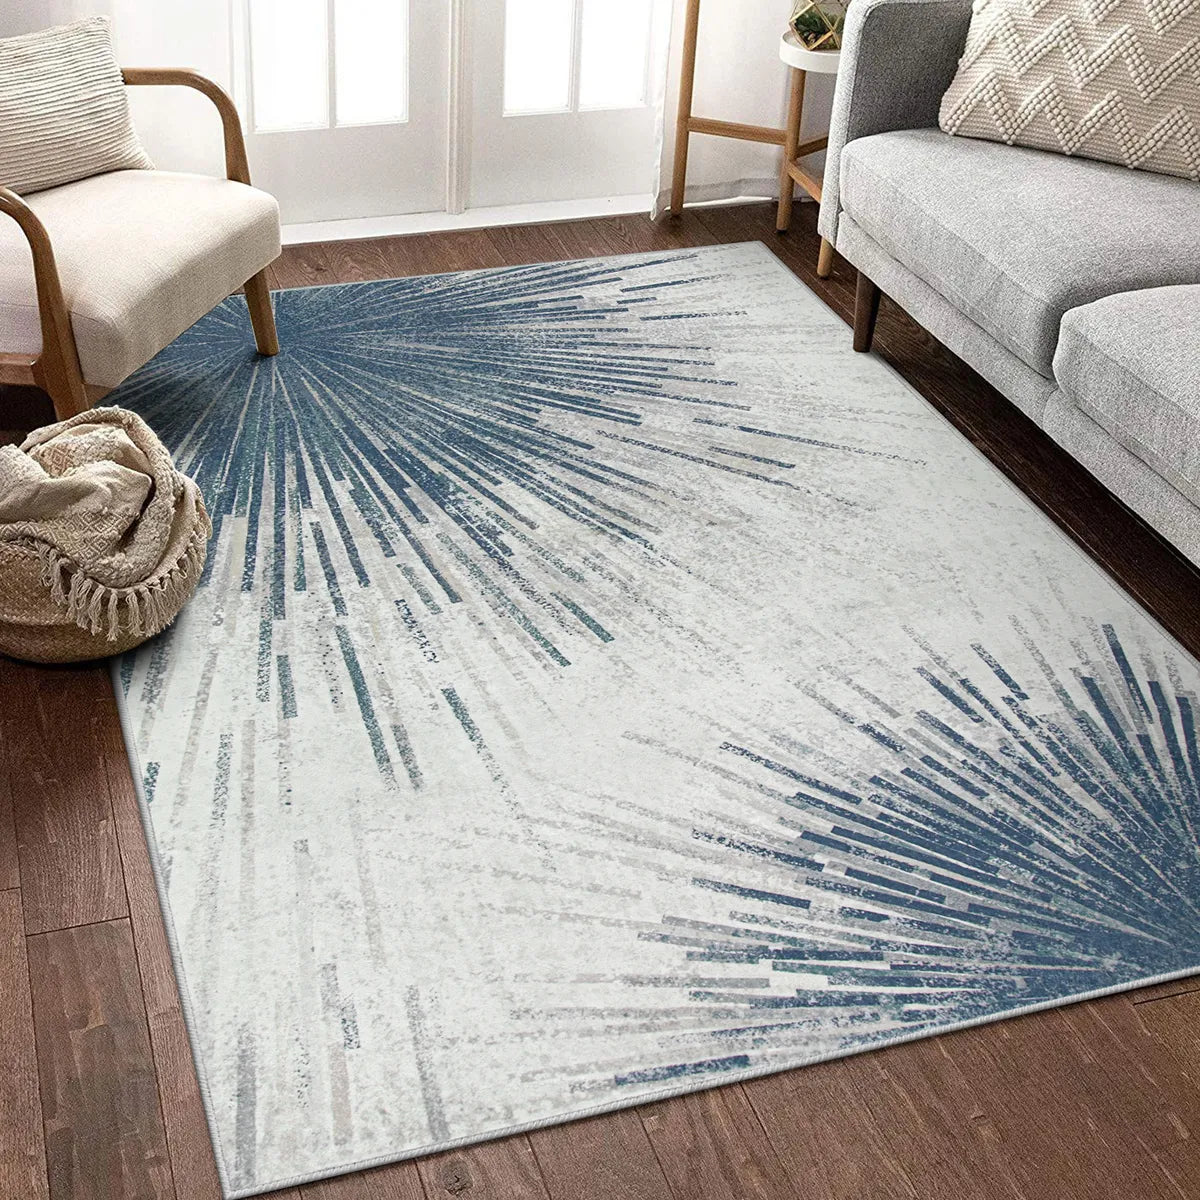 Lahome Modern Abstract Firework Blue Gray 4x6 Area Rug